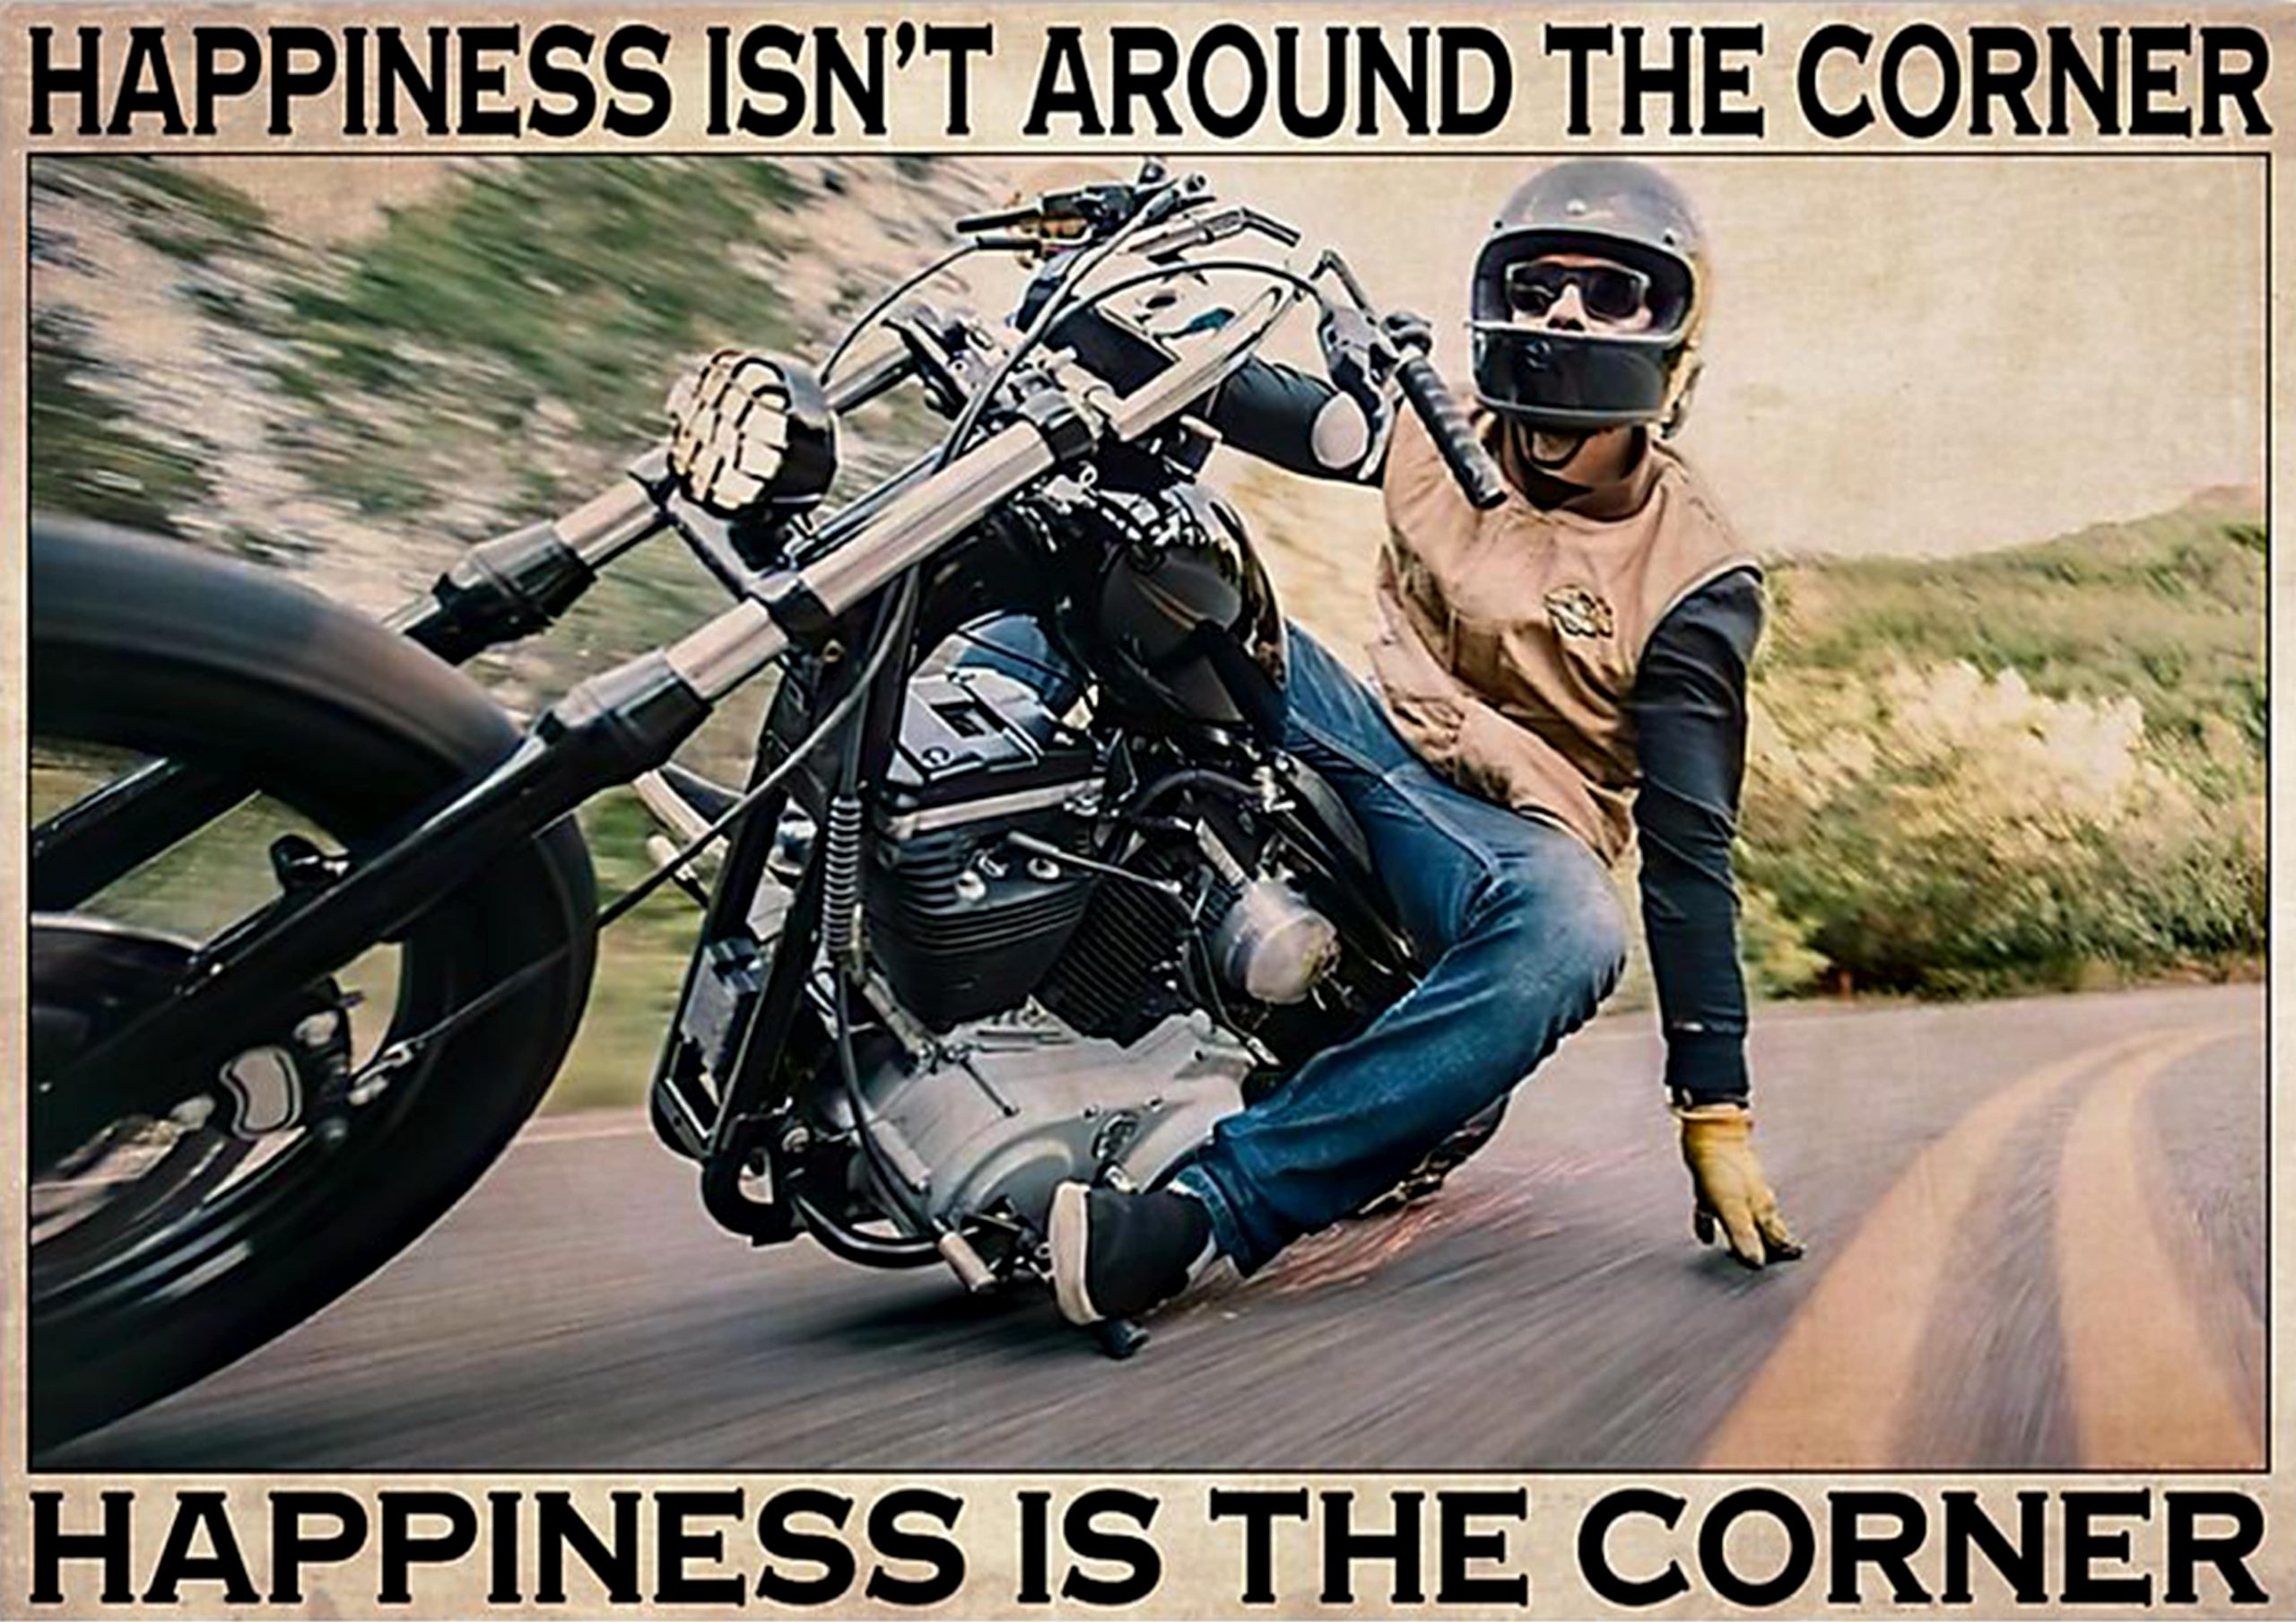 vintage motorcycle happiness isnt around the corner happiness is the corner poster 1